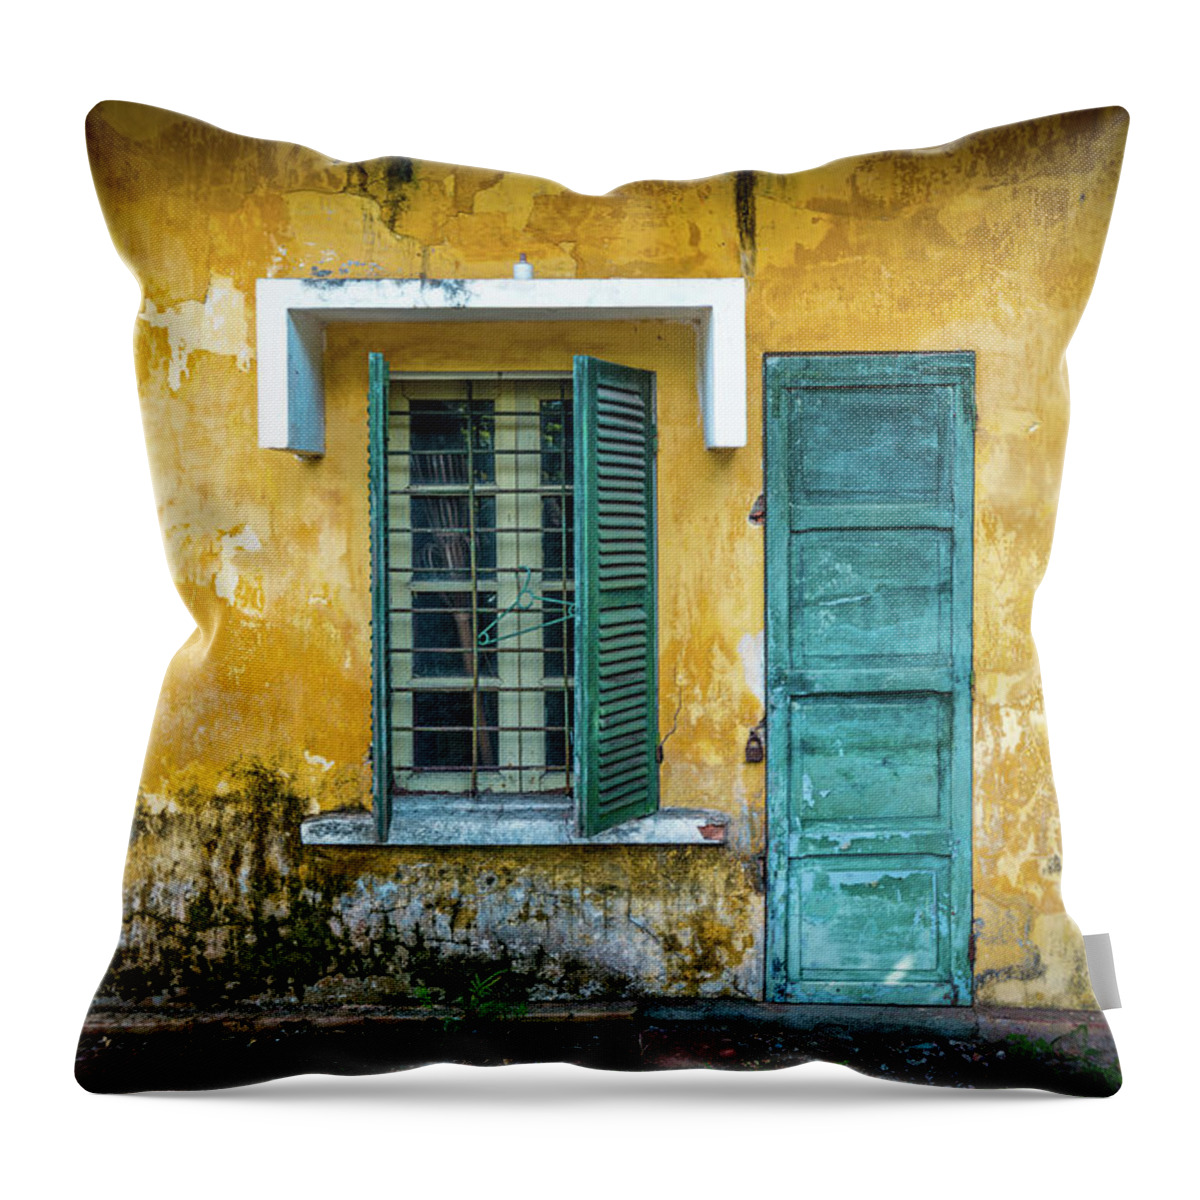 East Throw Pillow featuring the photograph Old And Worn House On Street In Vietnam by Kyolshin